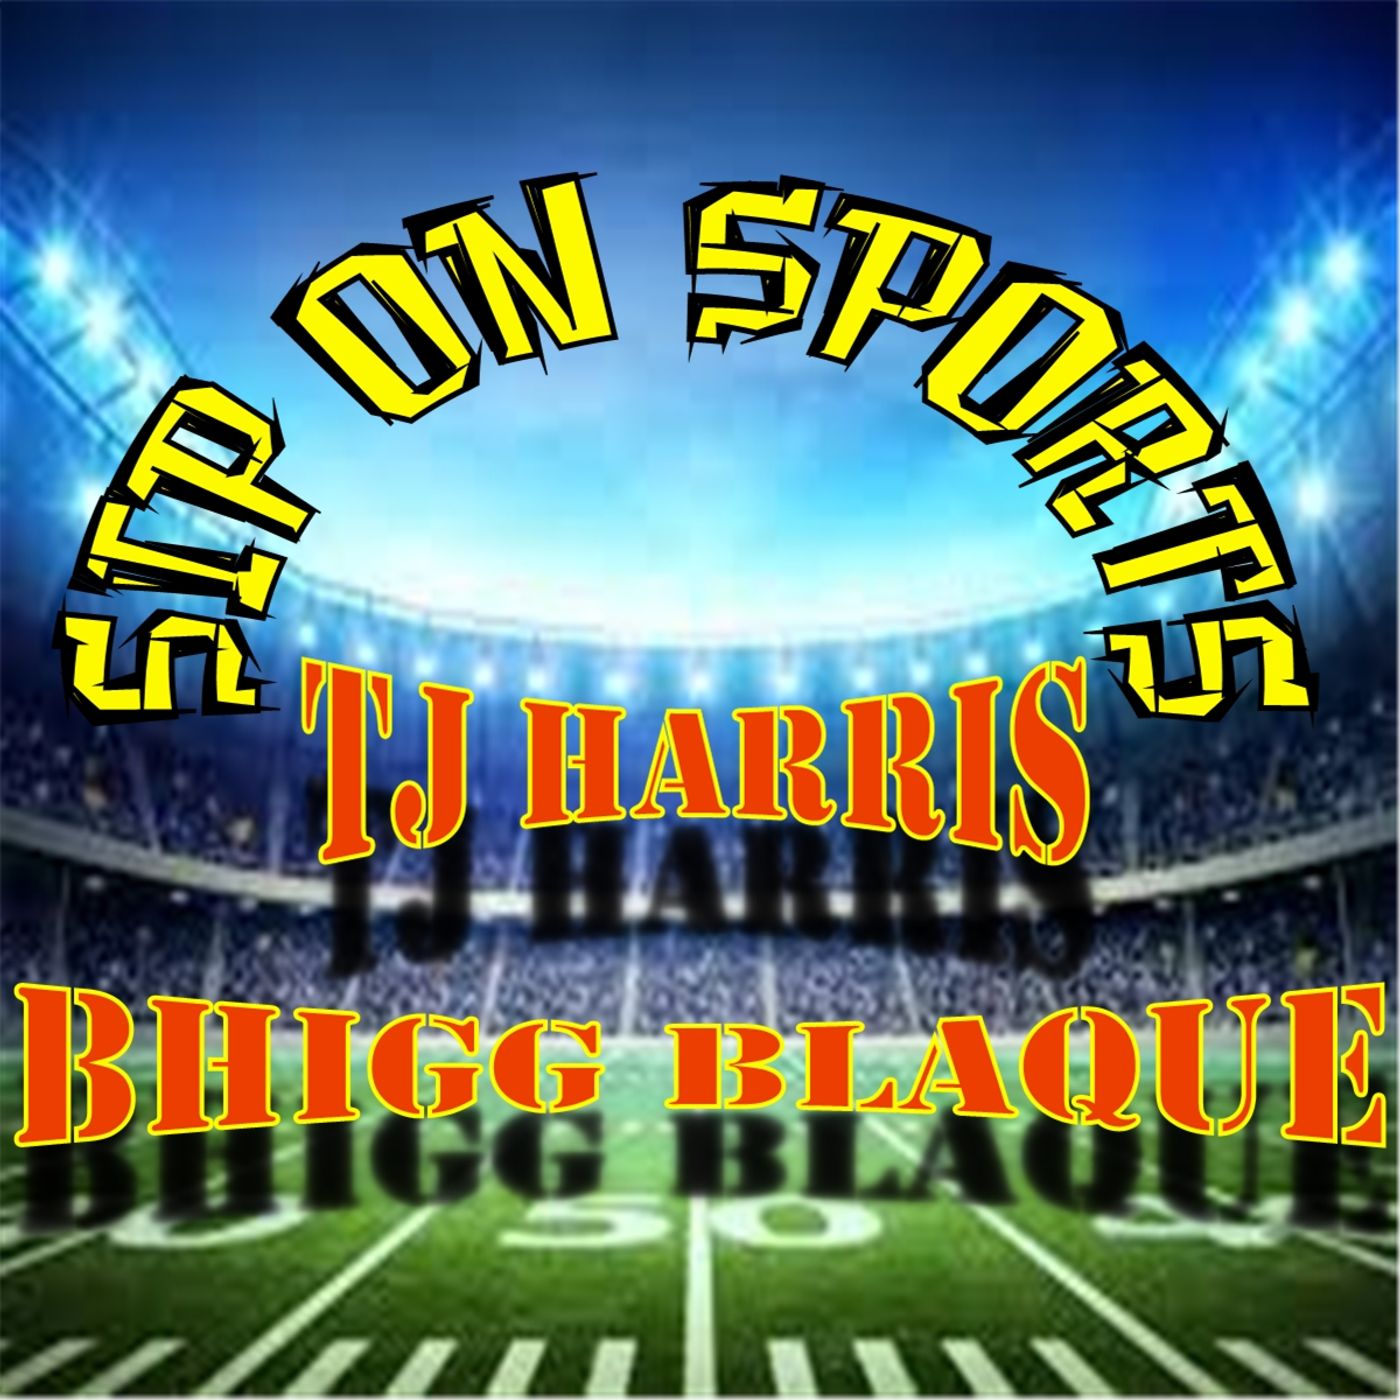 SIP on Sports- NFL Picks and Top 40 NBA Players #31-35